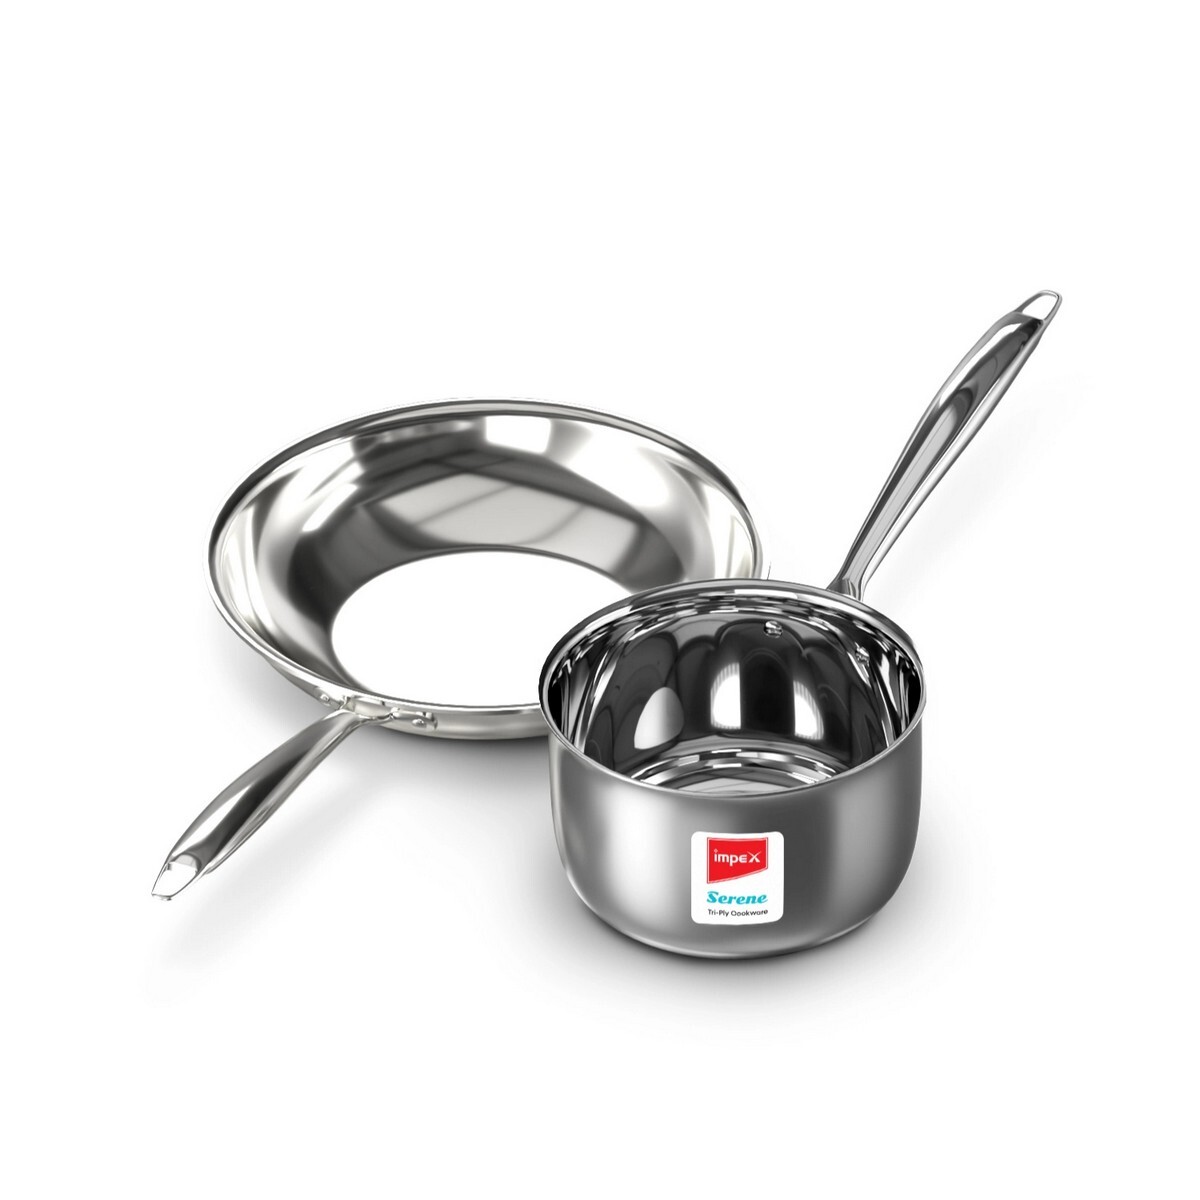 Impex StainlessSteel Tri-Ply 2pcSet Serene TFM2416